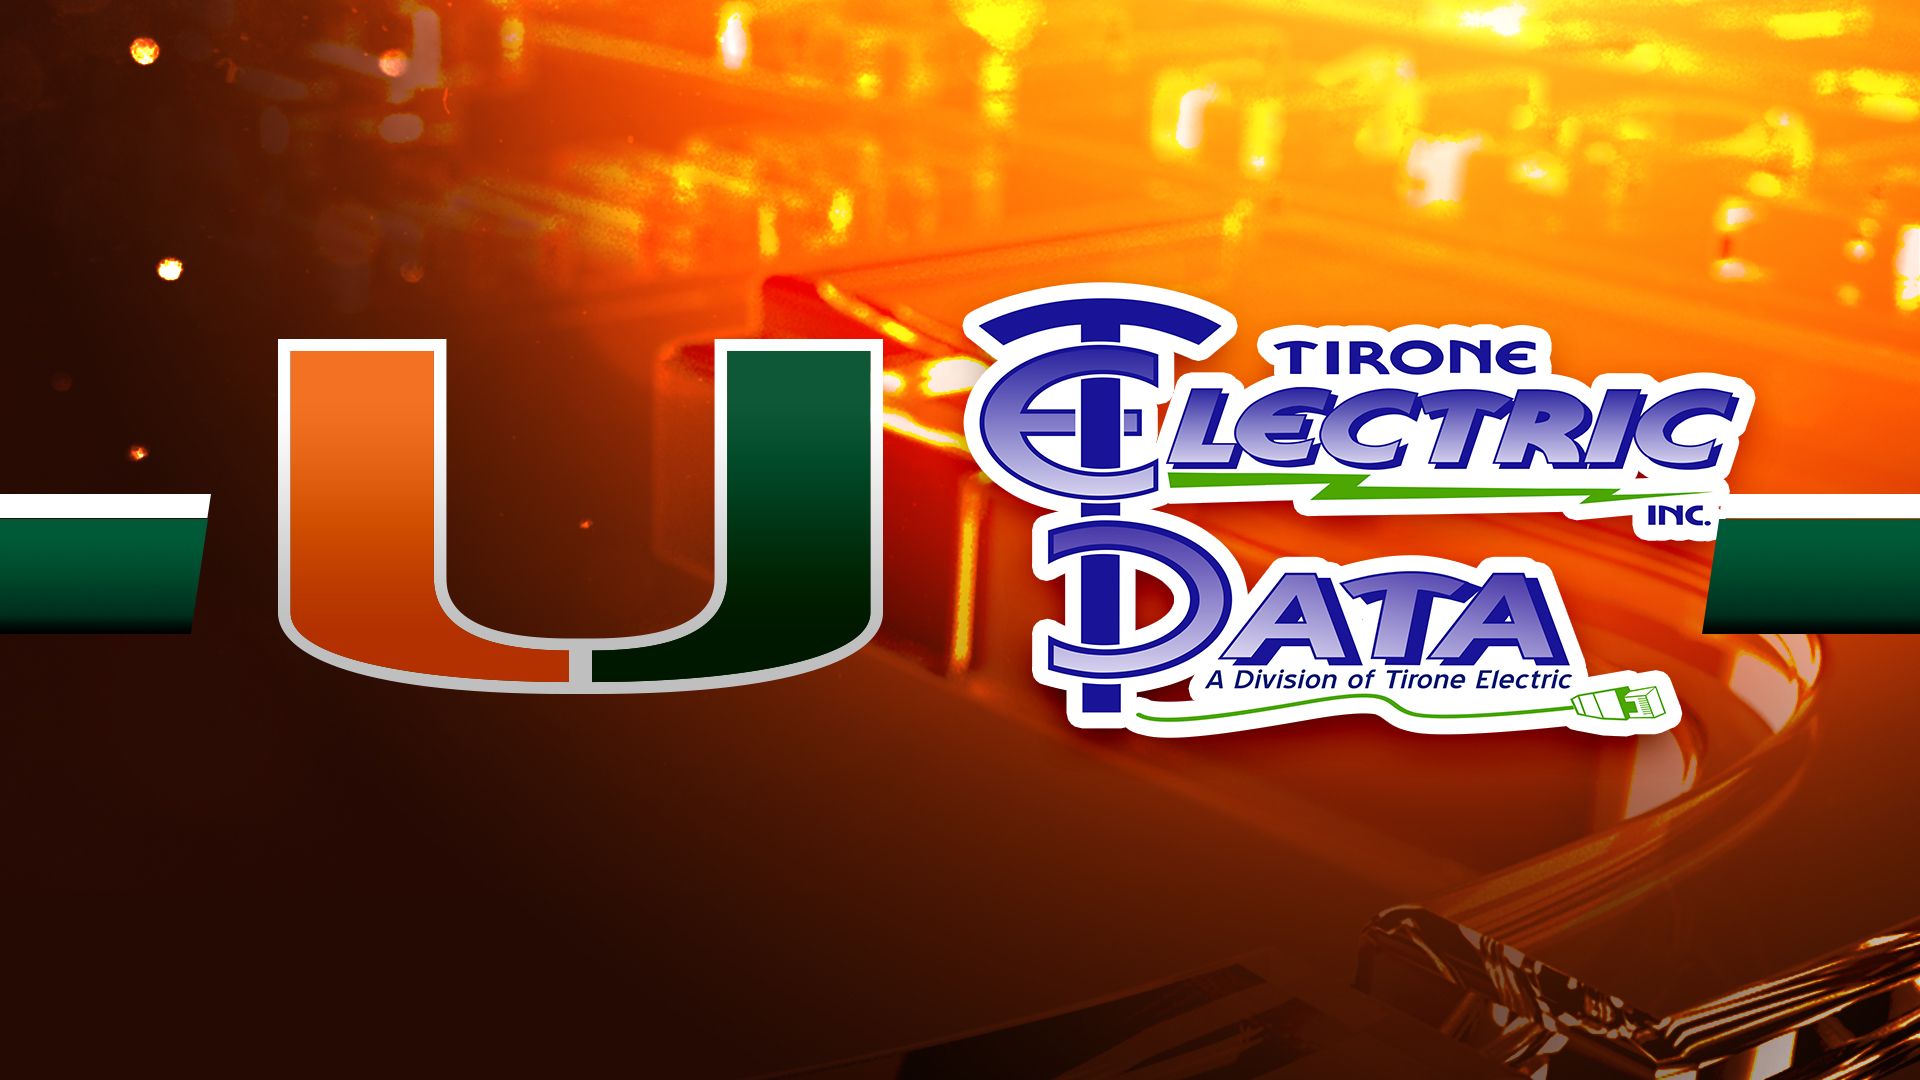 Miami Announces Official Partnership With Tirone Electric & Data